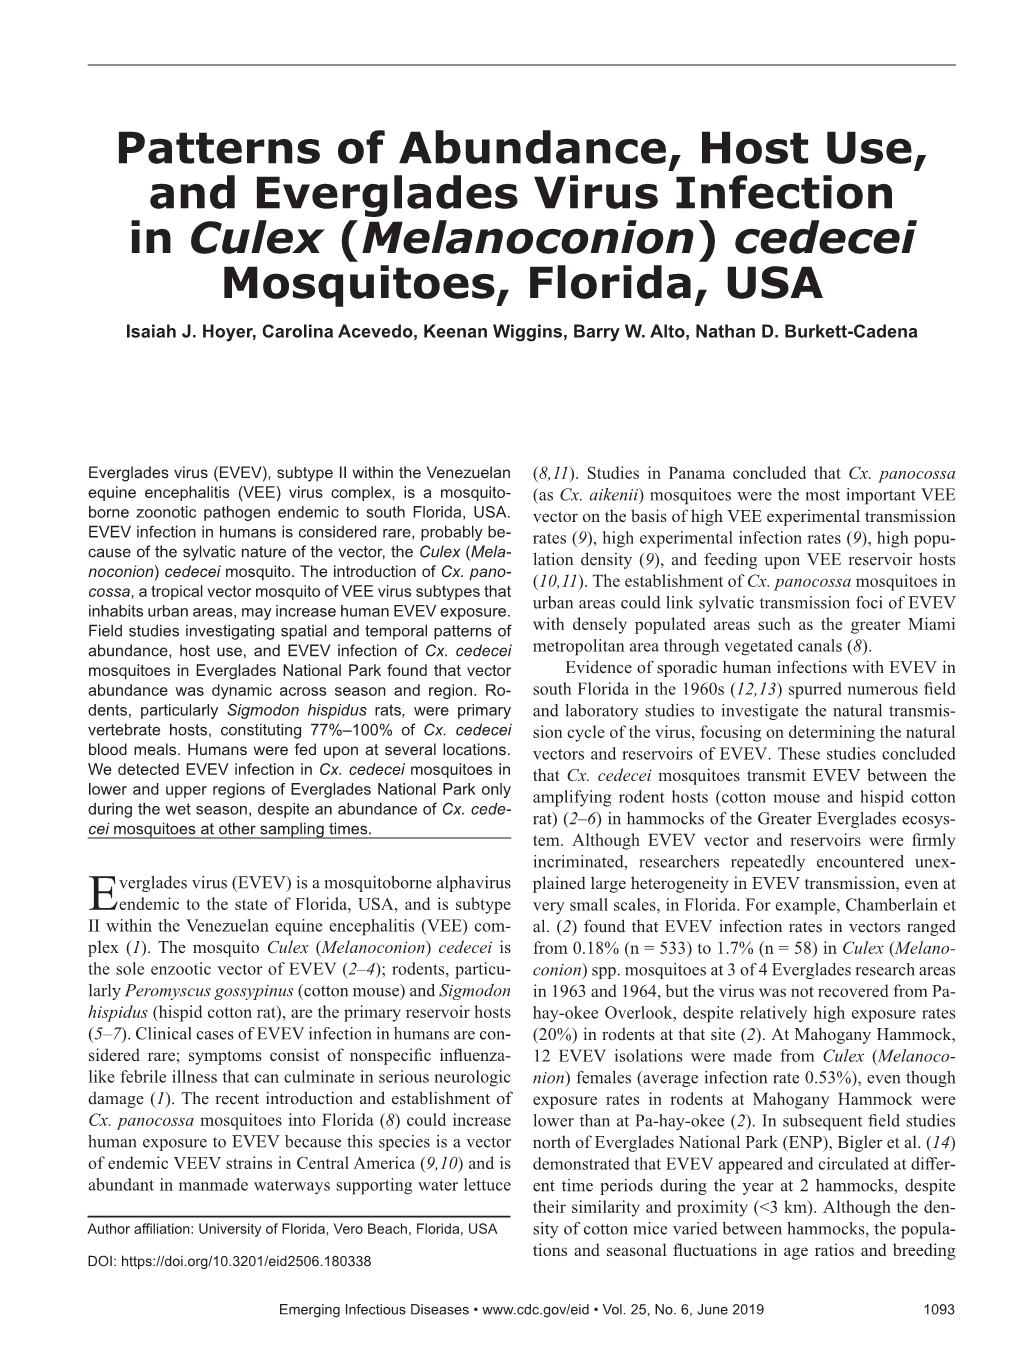 Patterns of Abundance, Host Use, and Everglades Virus Infection in Culex (Melanoconion) Cedecei Mosquitoes, Florida, USA Isaiah J